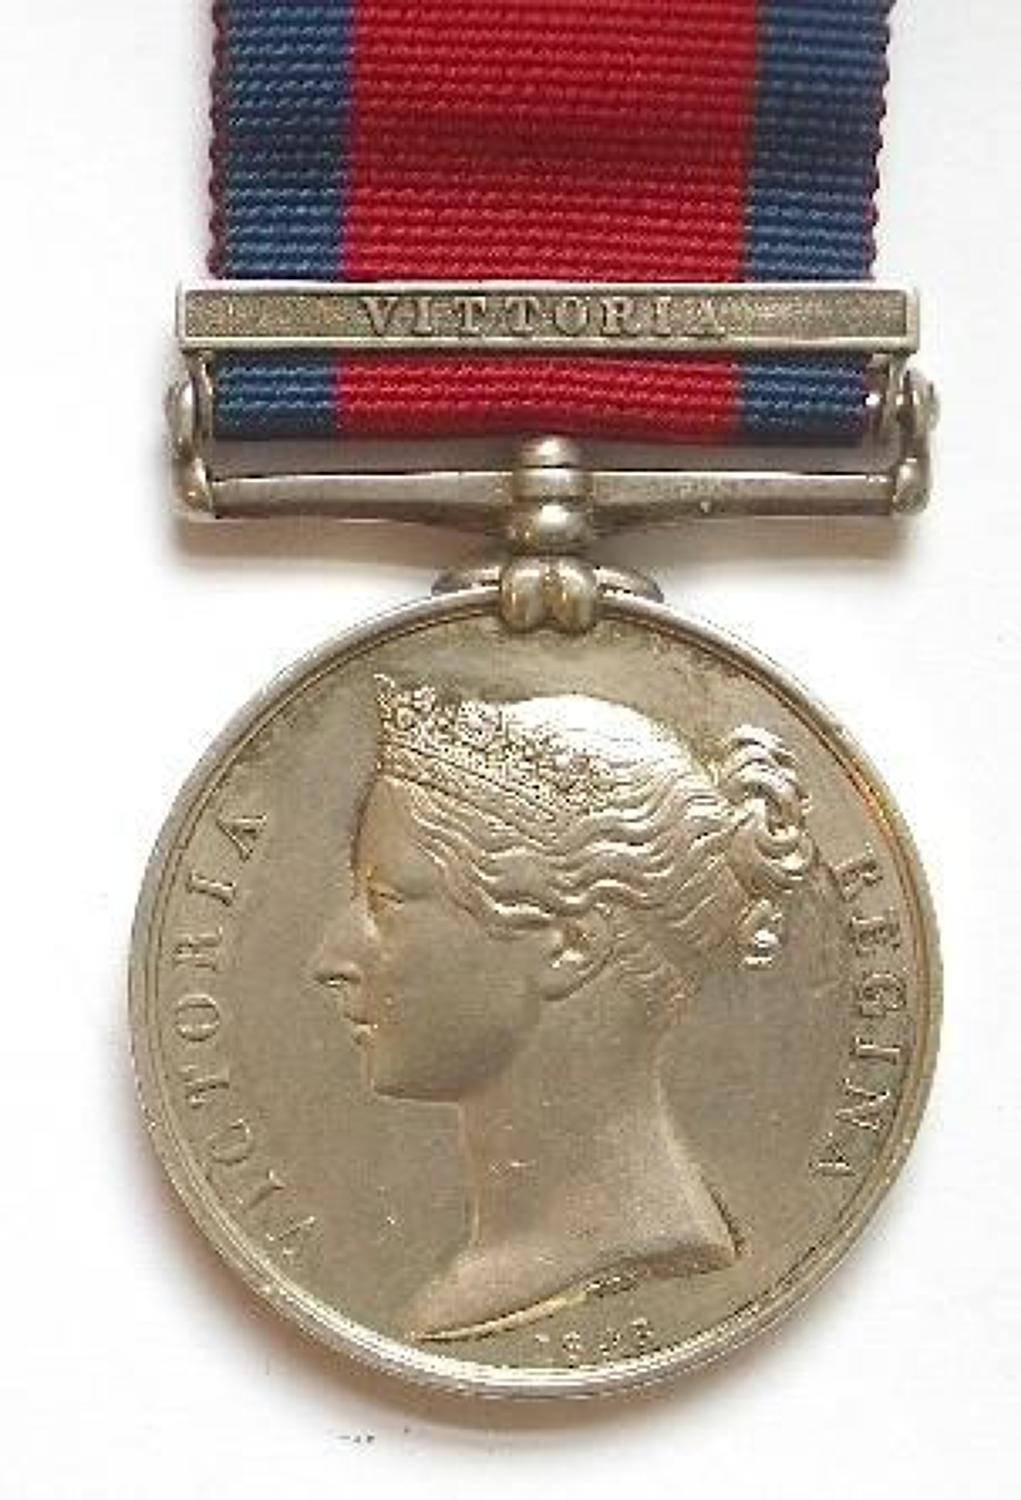 2nd Life Guards, Military General Service Medal (1793-1814).